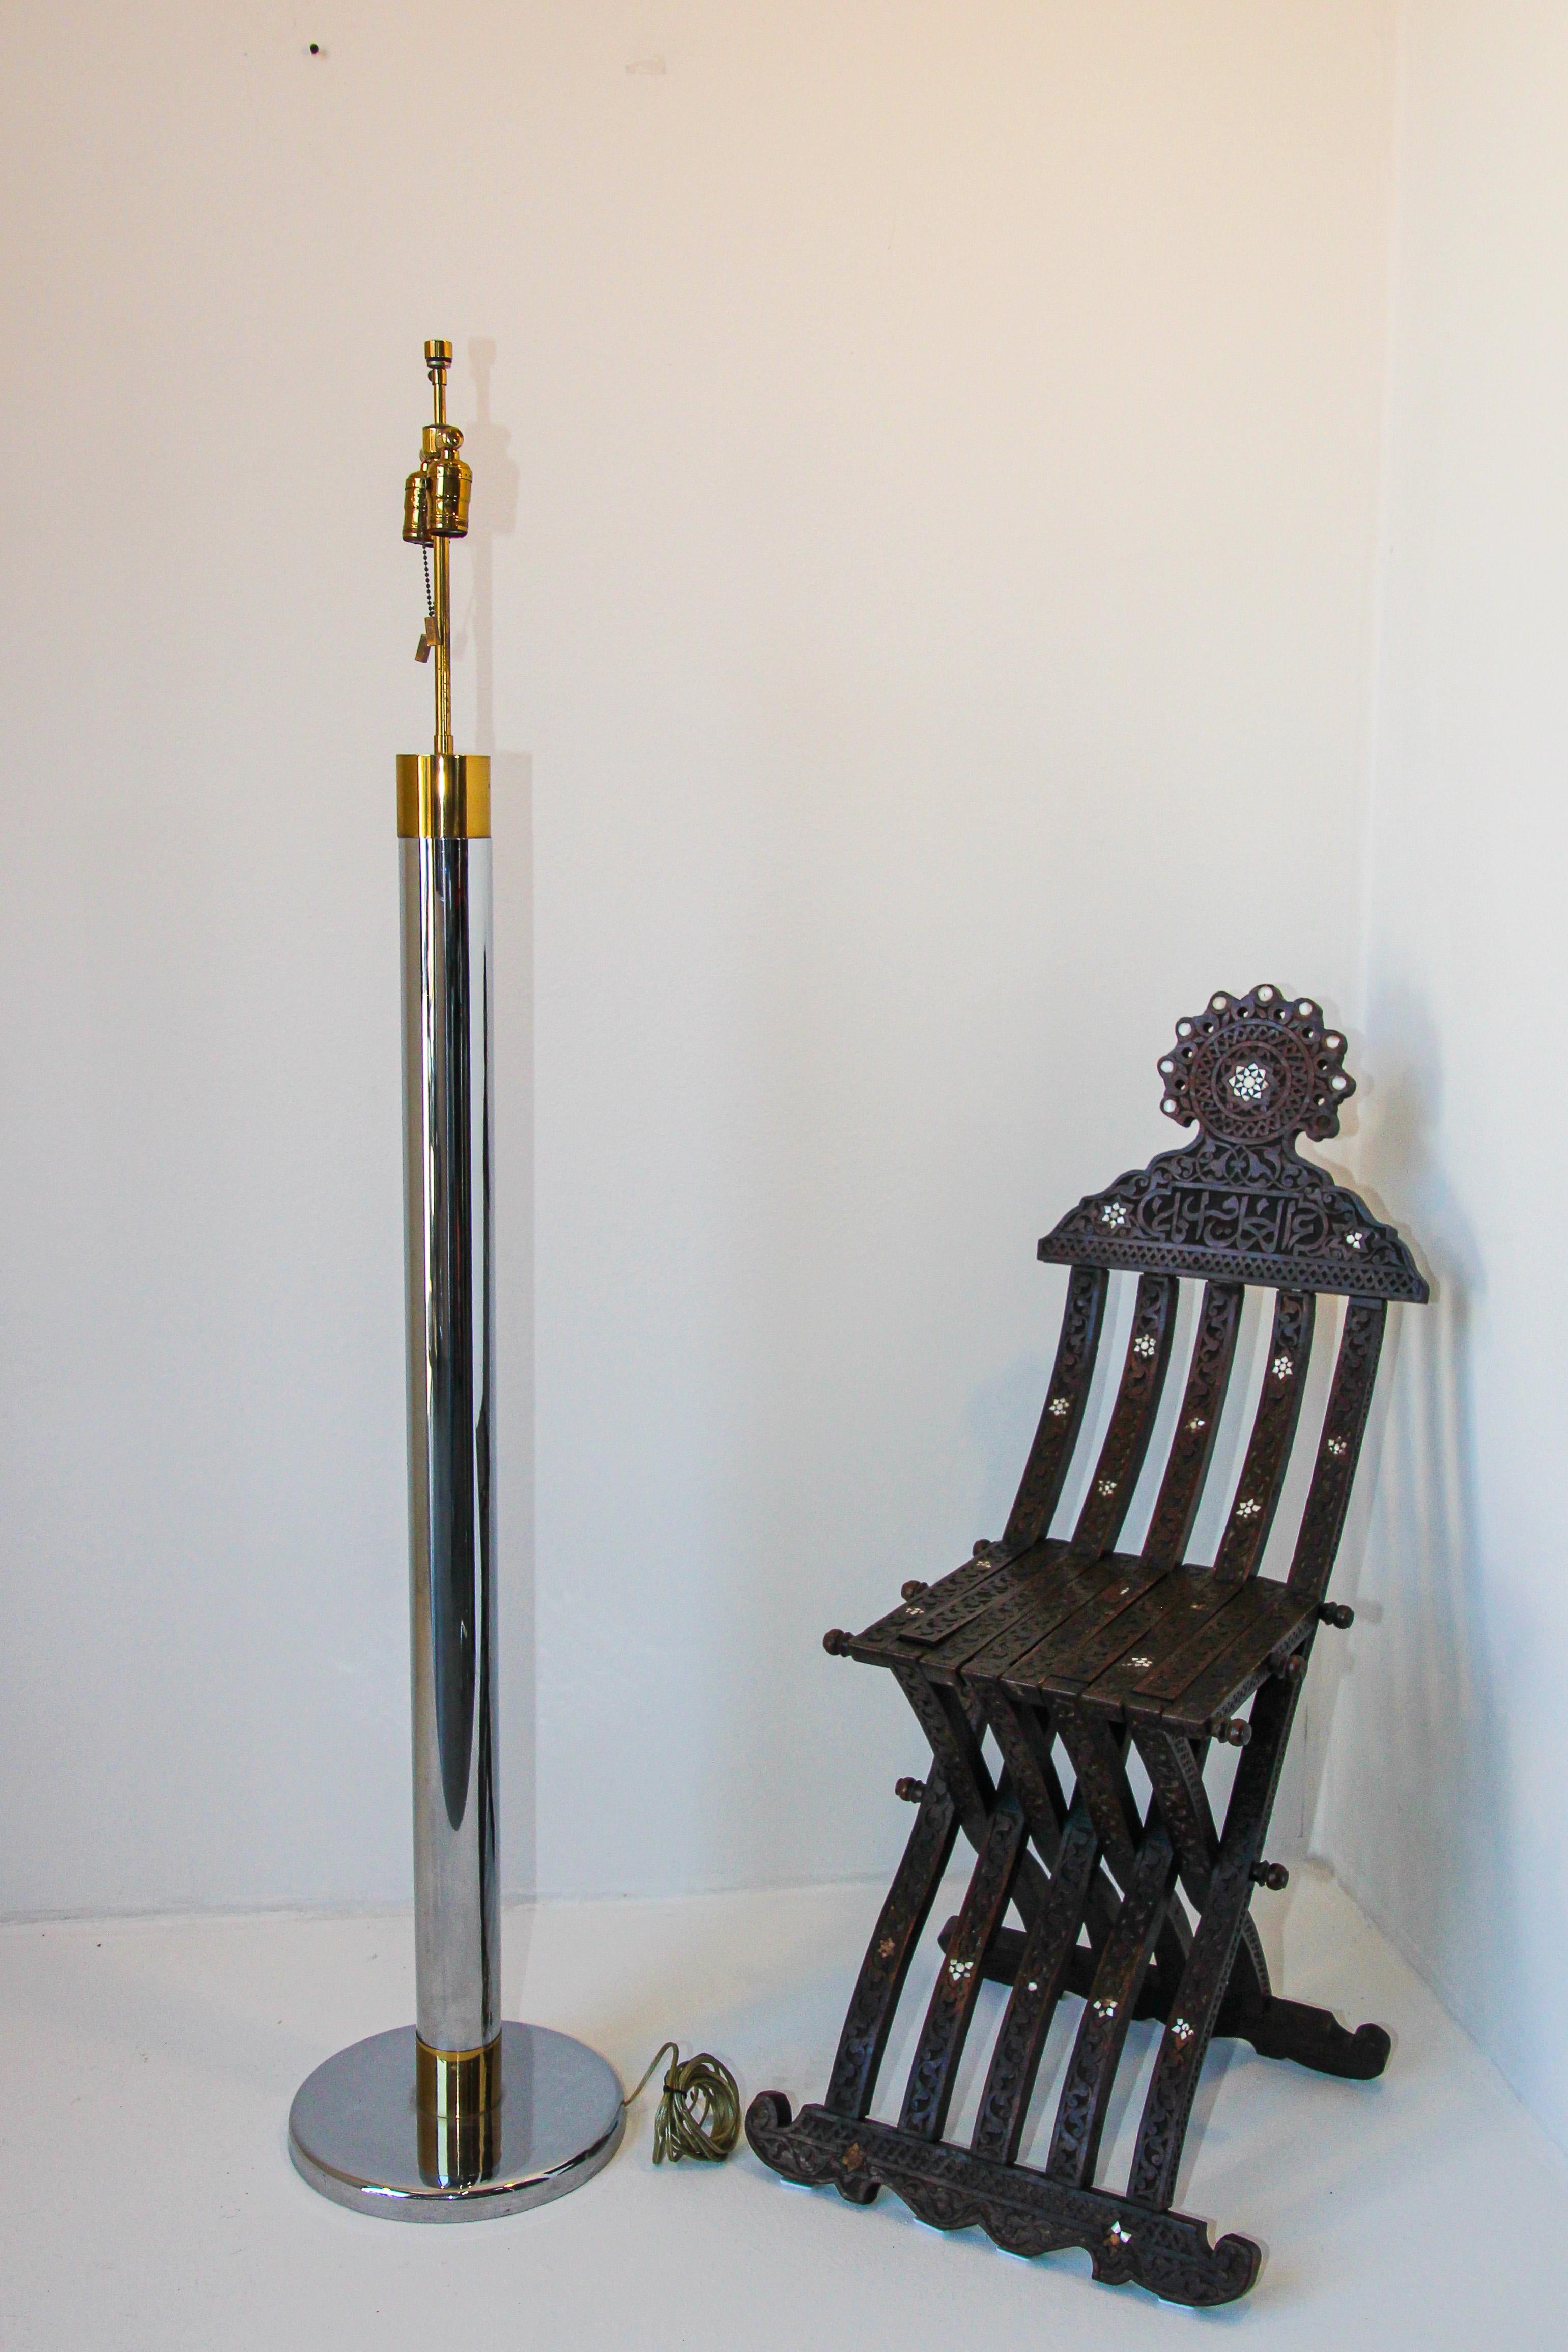 Midcentury Vintage Italian Bicolor Chrome and Brass 1970s Tall Floor Lamp For Sale 3